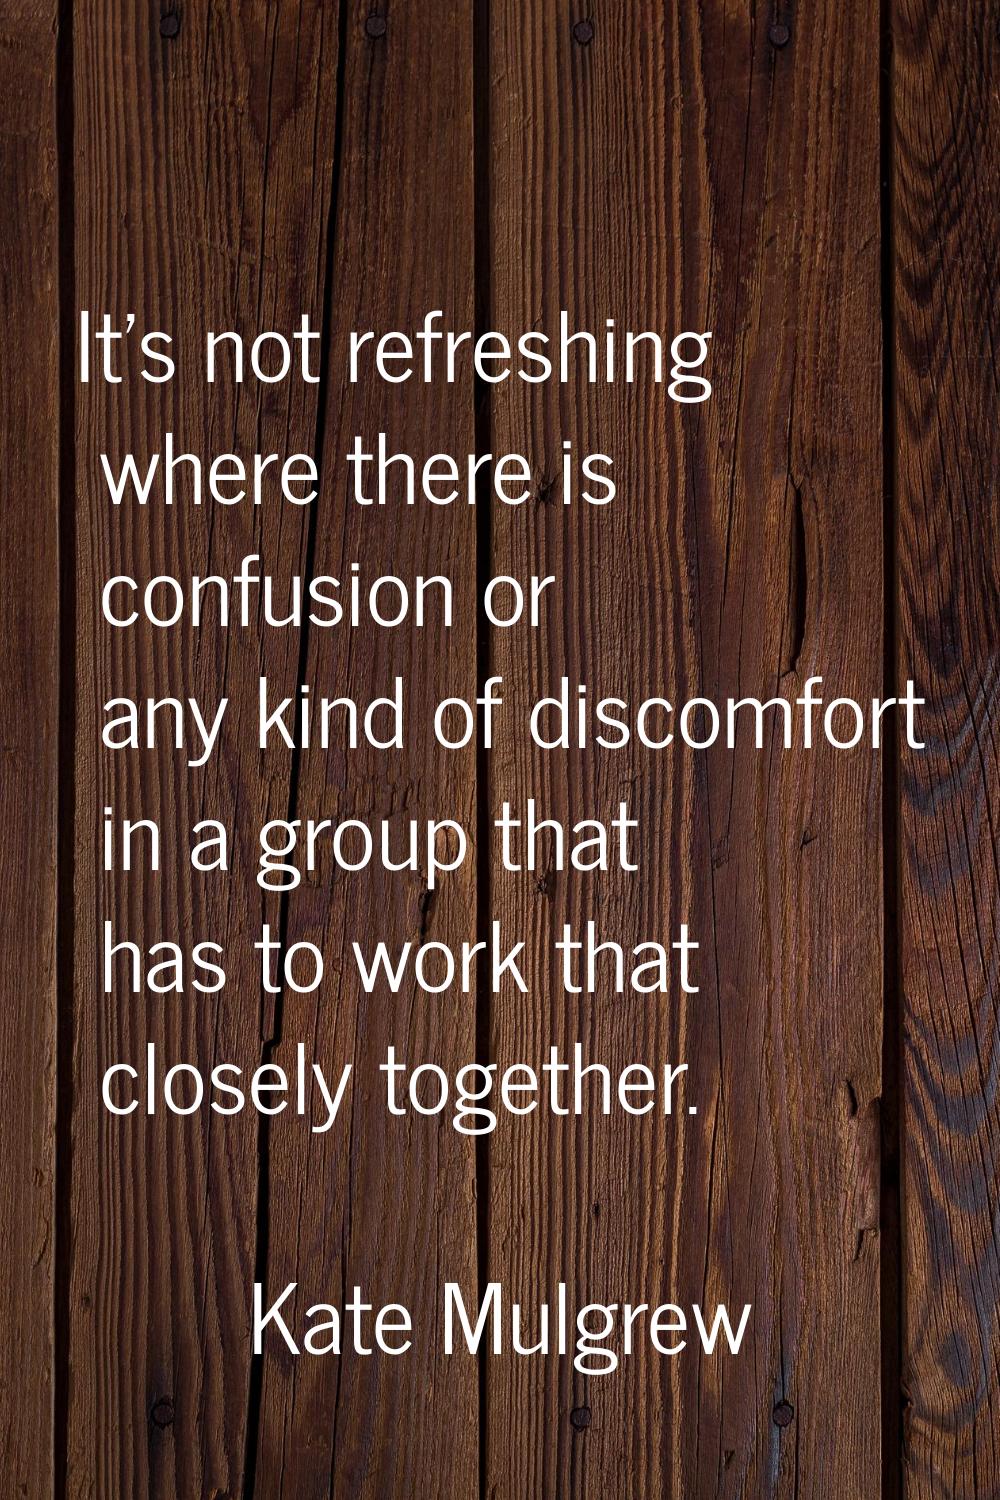 It's not refreshing where there is confusion or any kind of discomfort in a group that has to work 